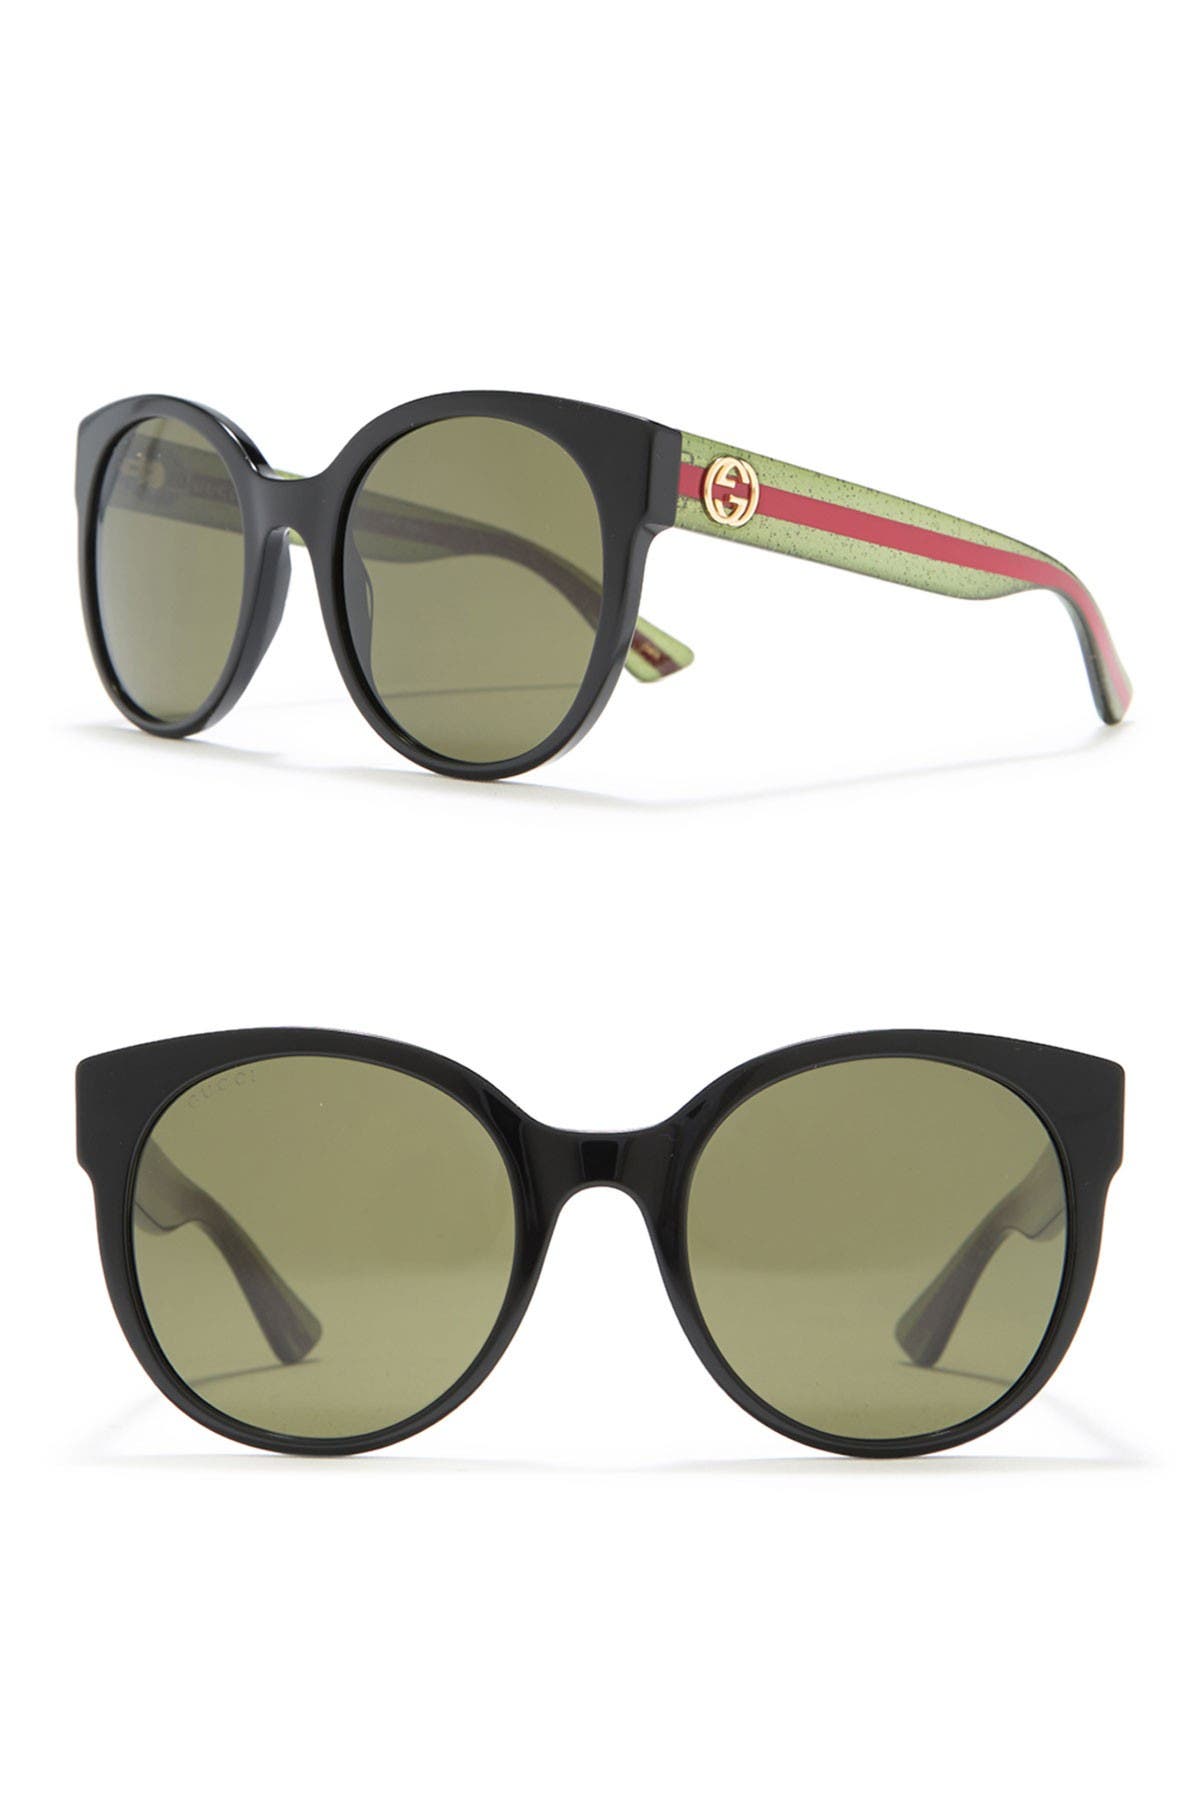 gucci shades nordstrom